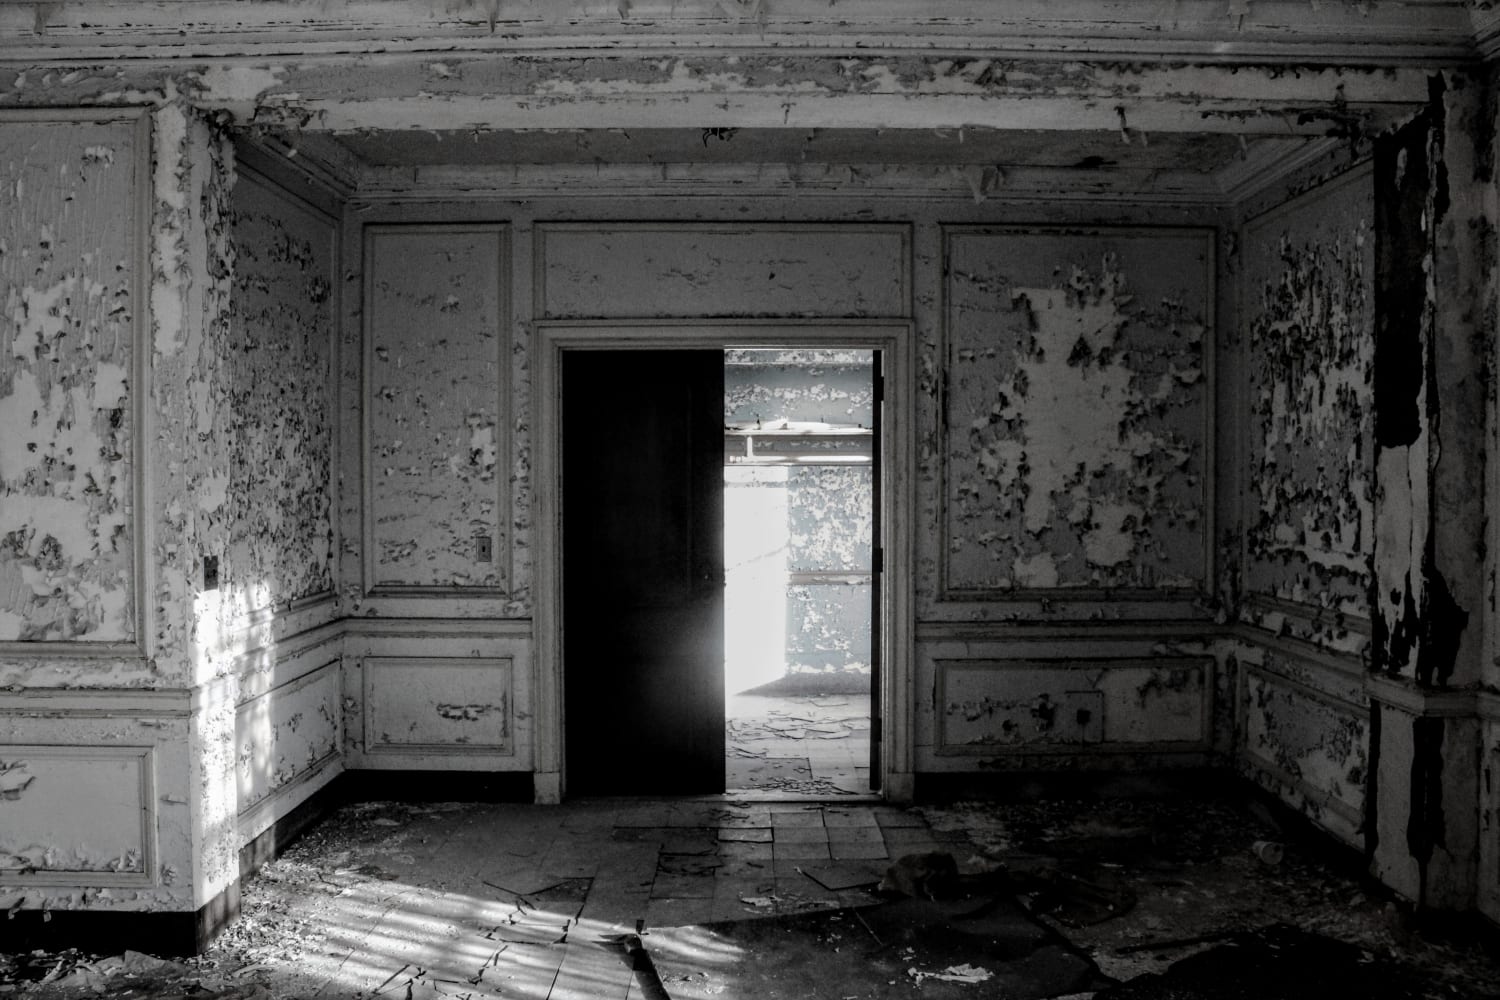 A doorway in decay in an abandoned mental hospital